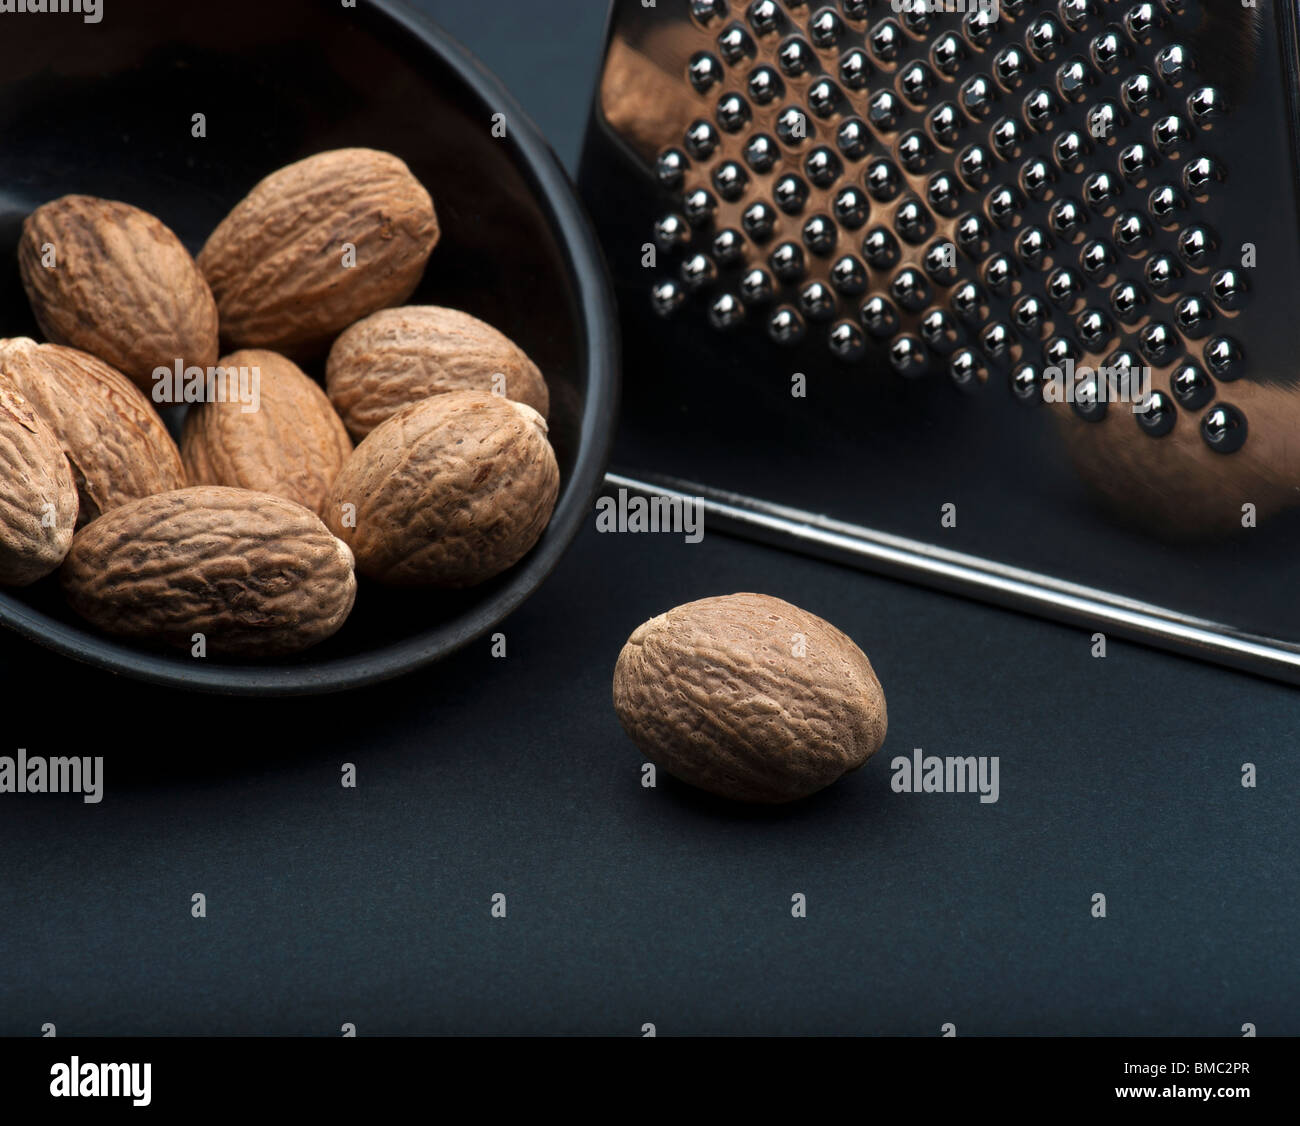 A Nutmeg On A Black Background, In Front Of A Black Dish Of Nutmegs and A Chrome Grater Stock Photo